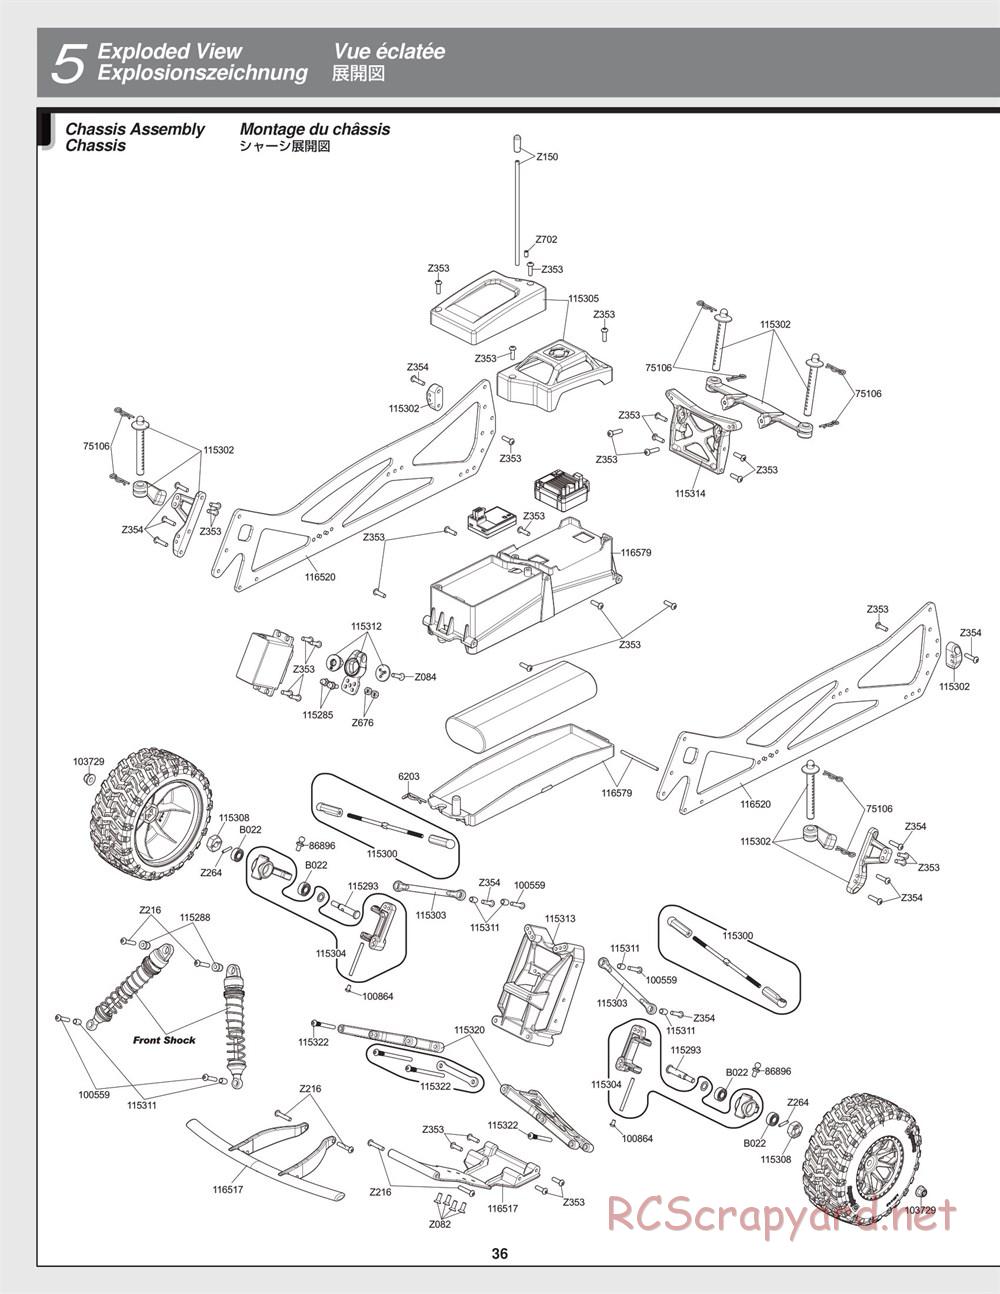 HPI - Jumpshot SC - Exploded View - Page 36